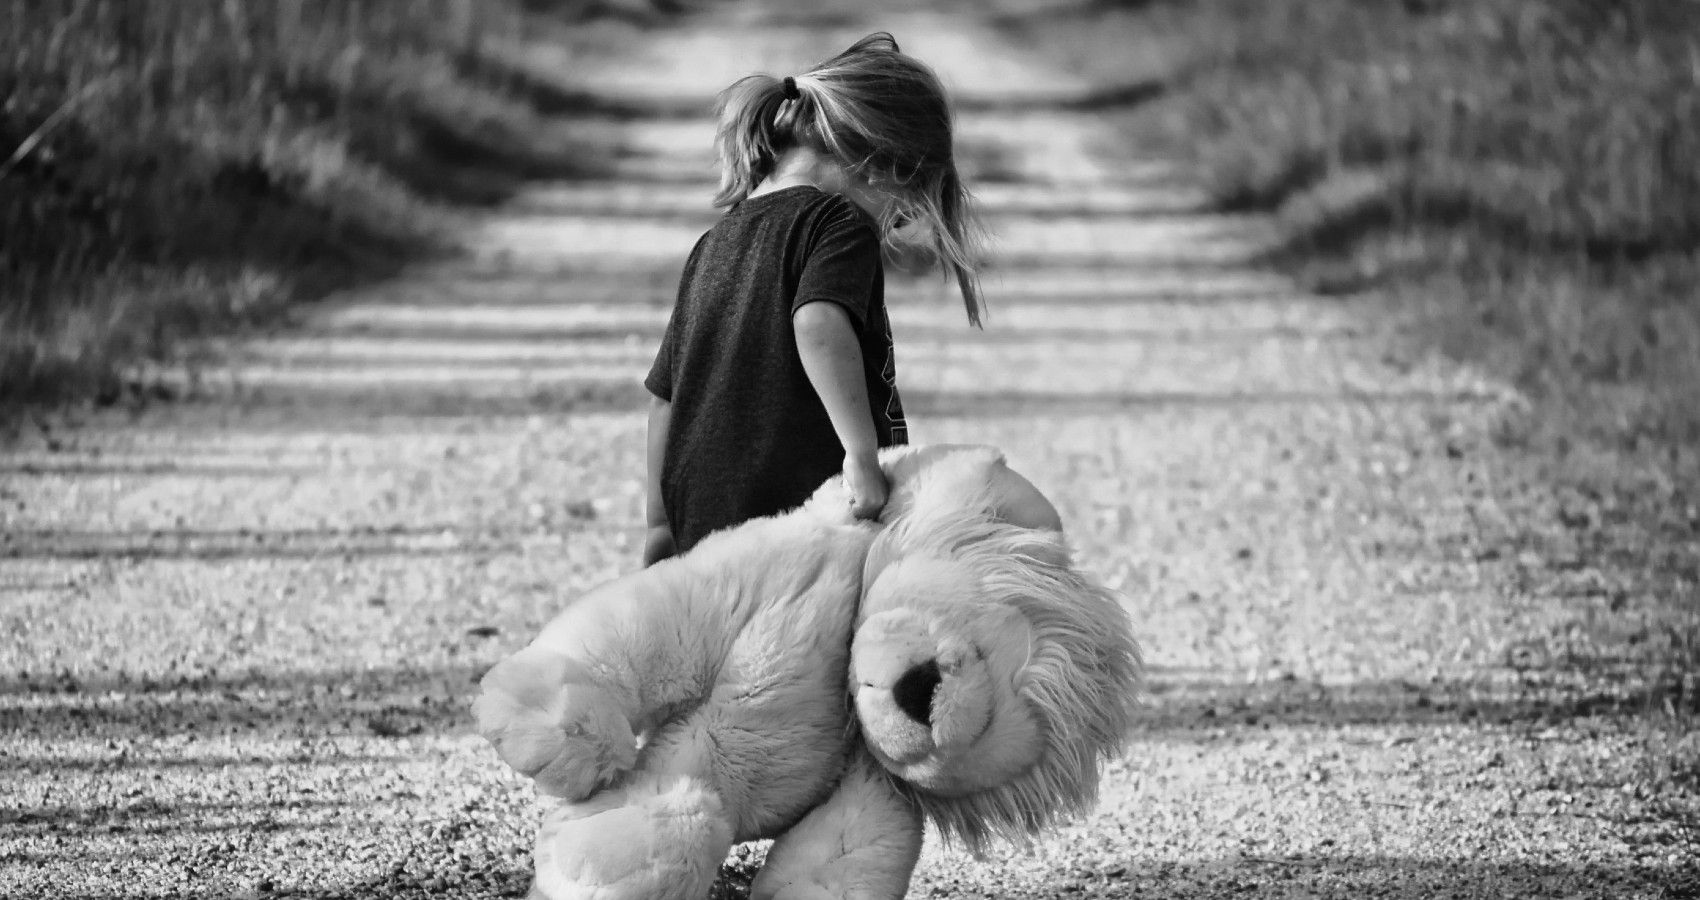 A Picture Of A Sad Child Holdin A Lion Black And White